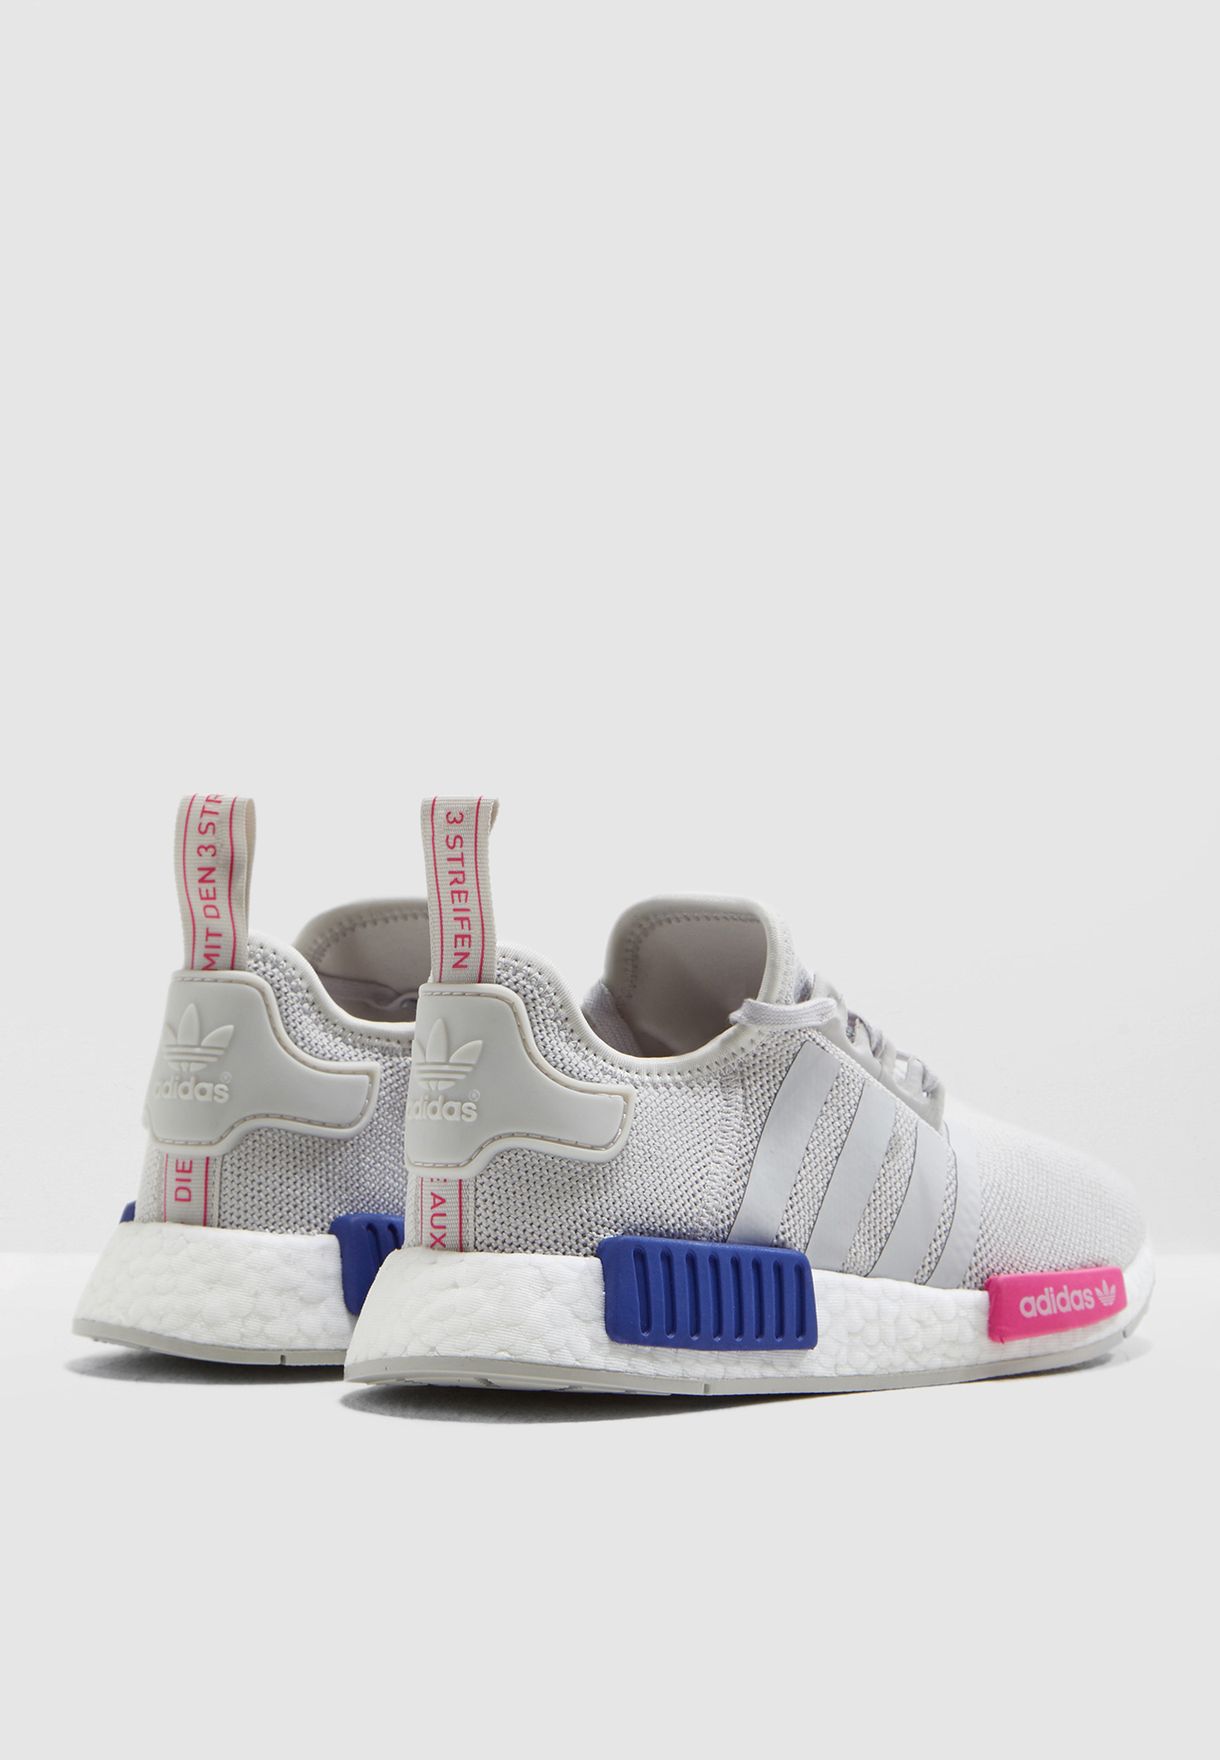 youth nmd r1 shoes